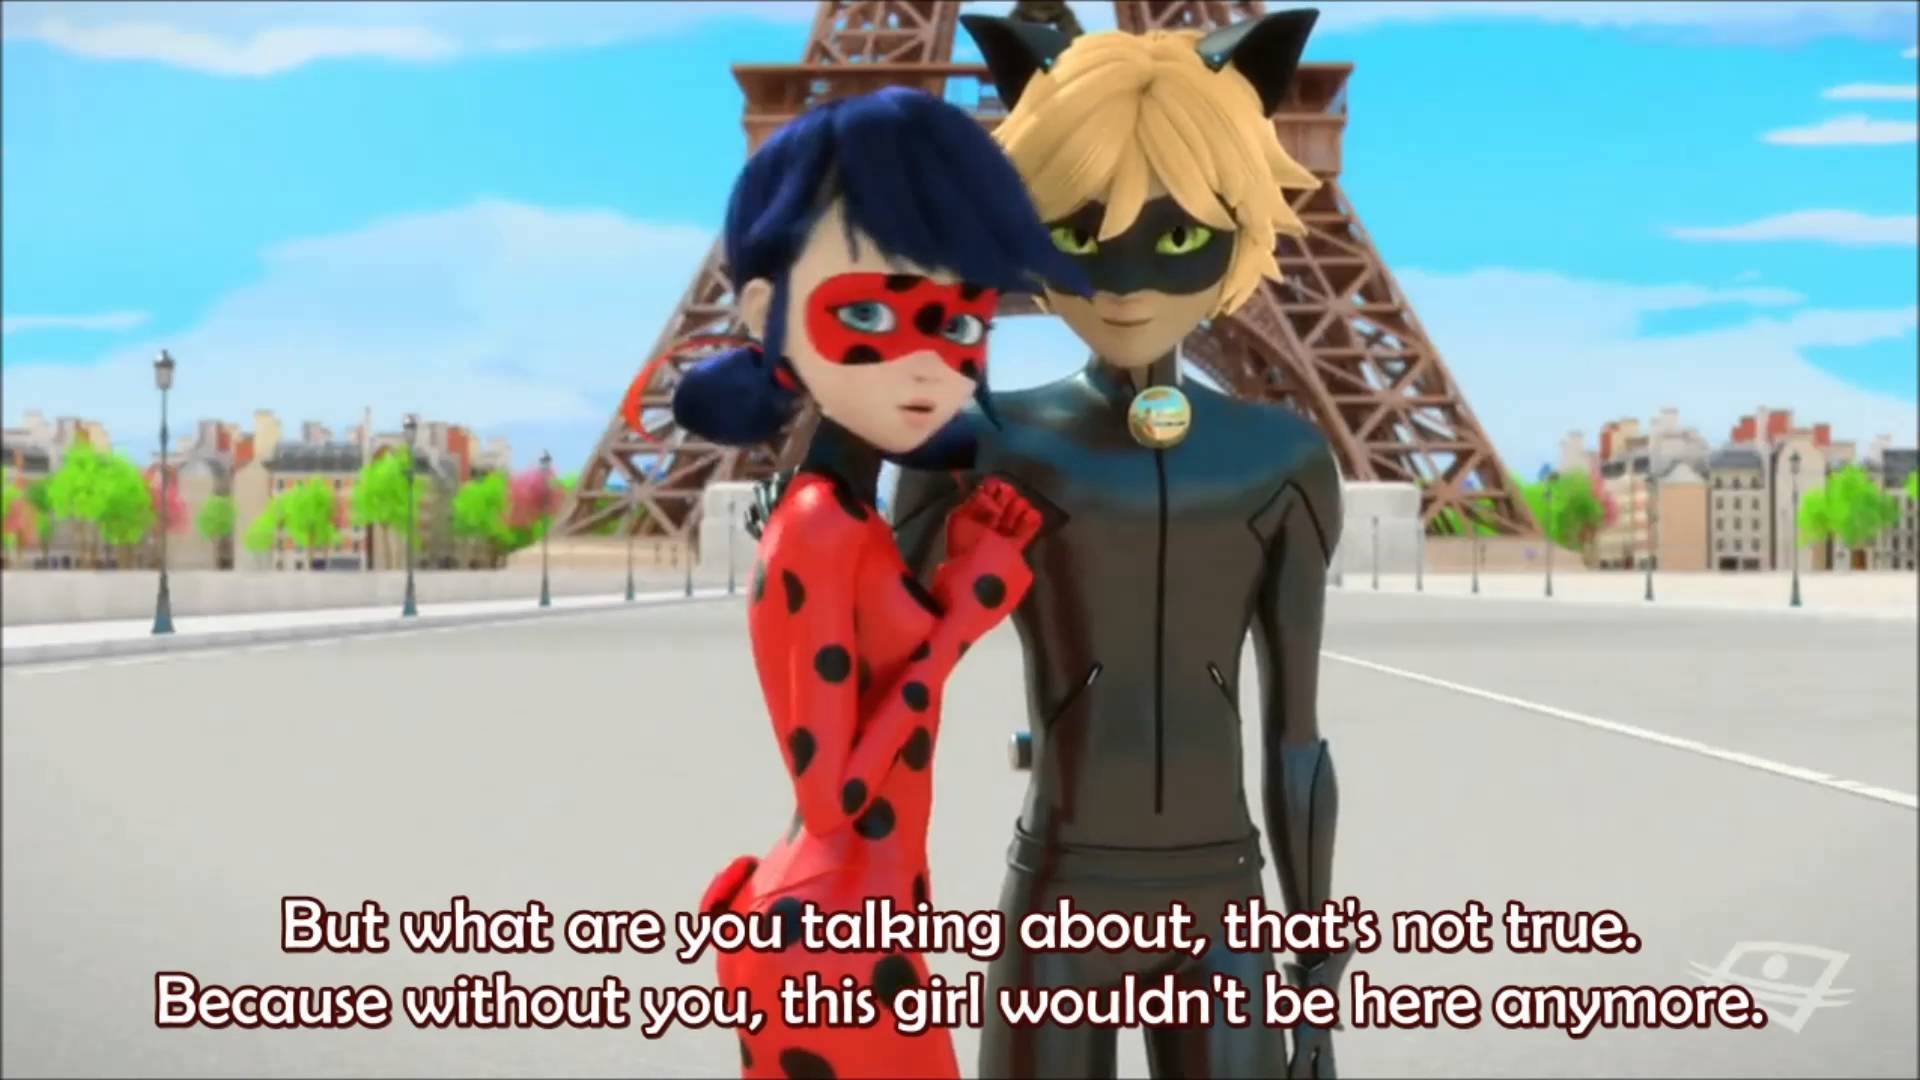 1920x1080 CHAT NOIR COMFORTS LADYBUG FOR THE FIRST TIME